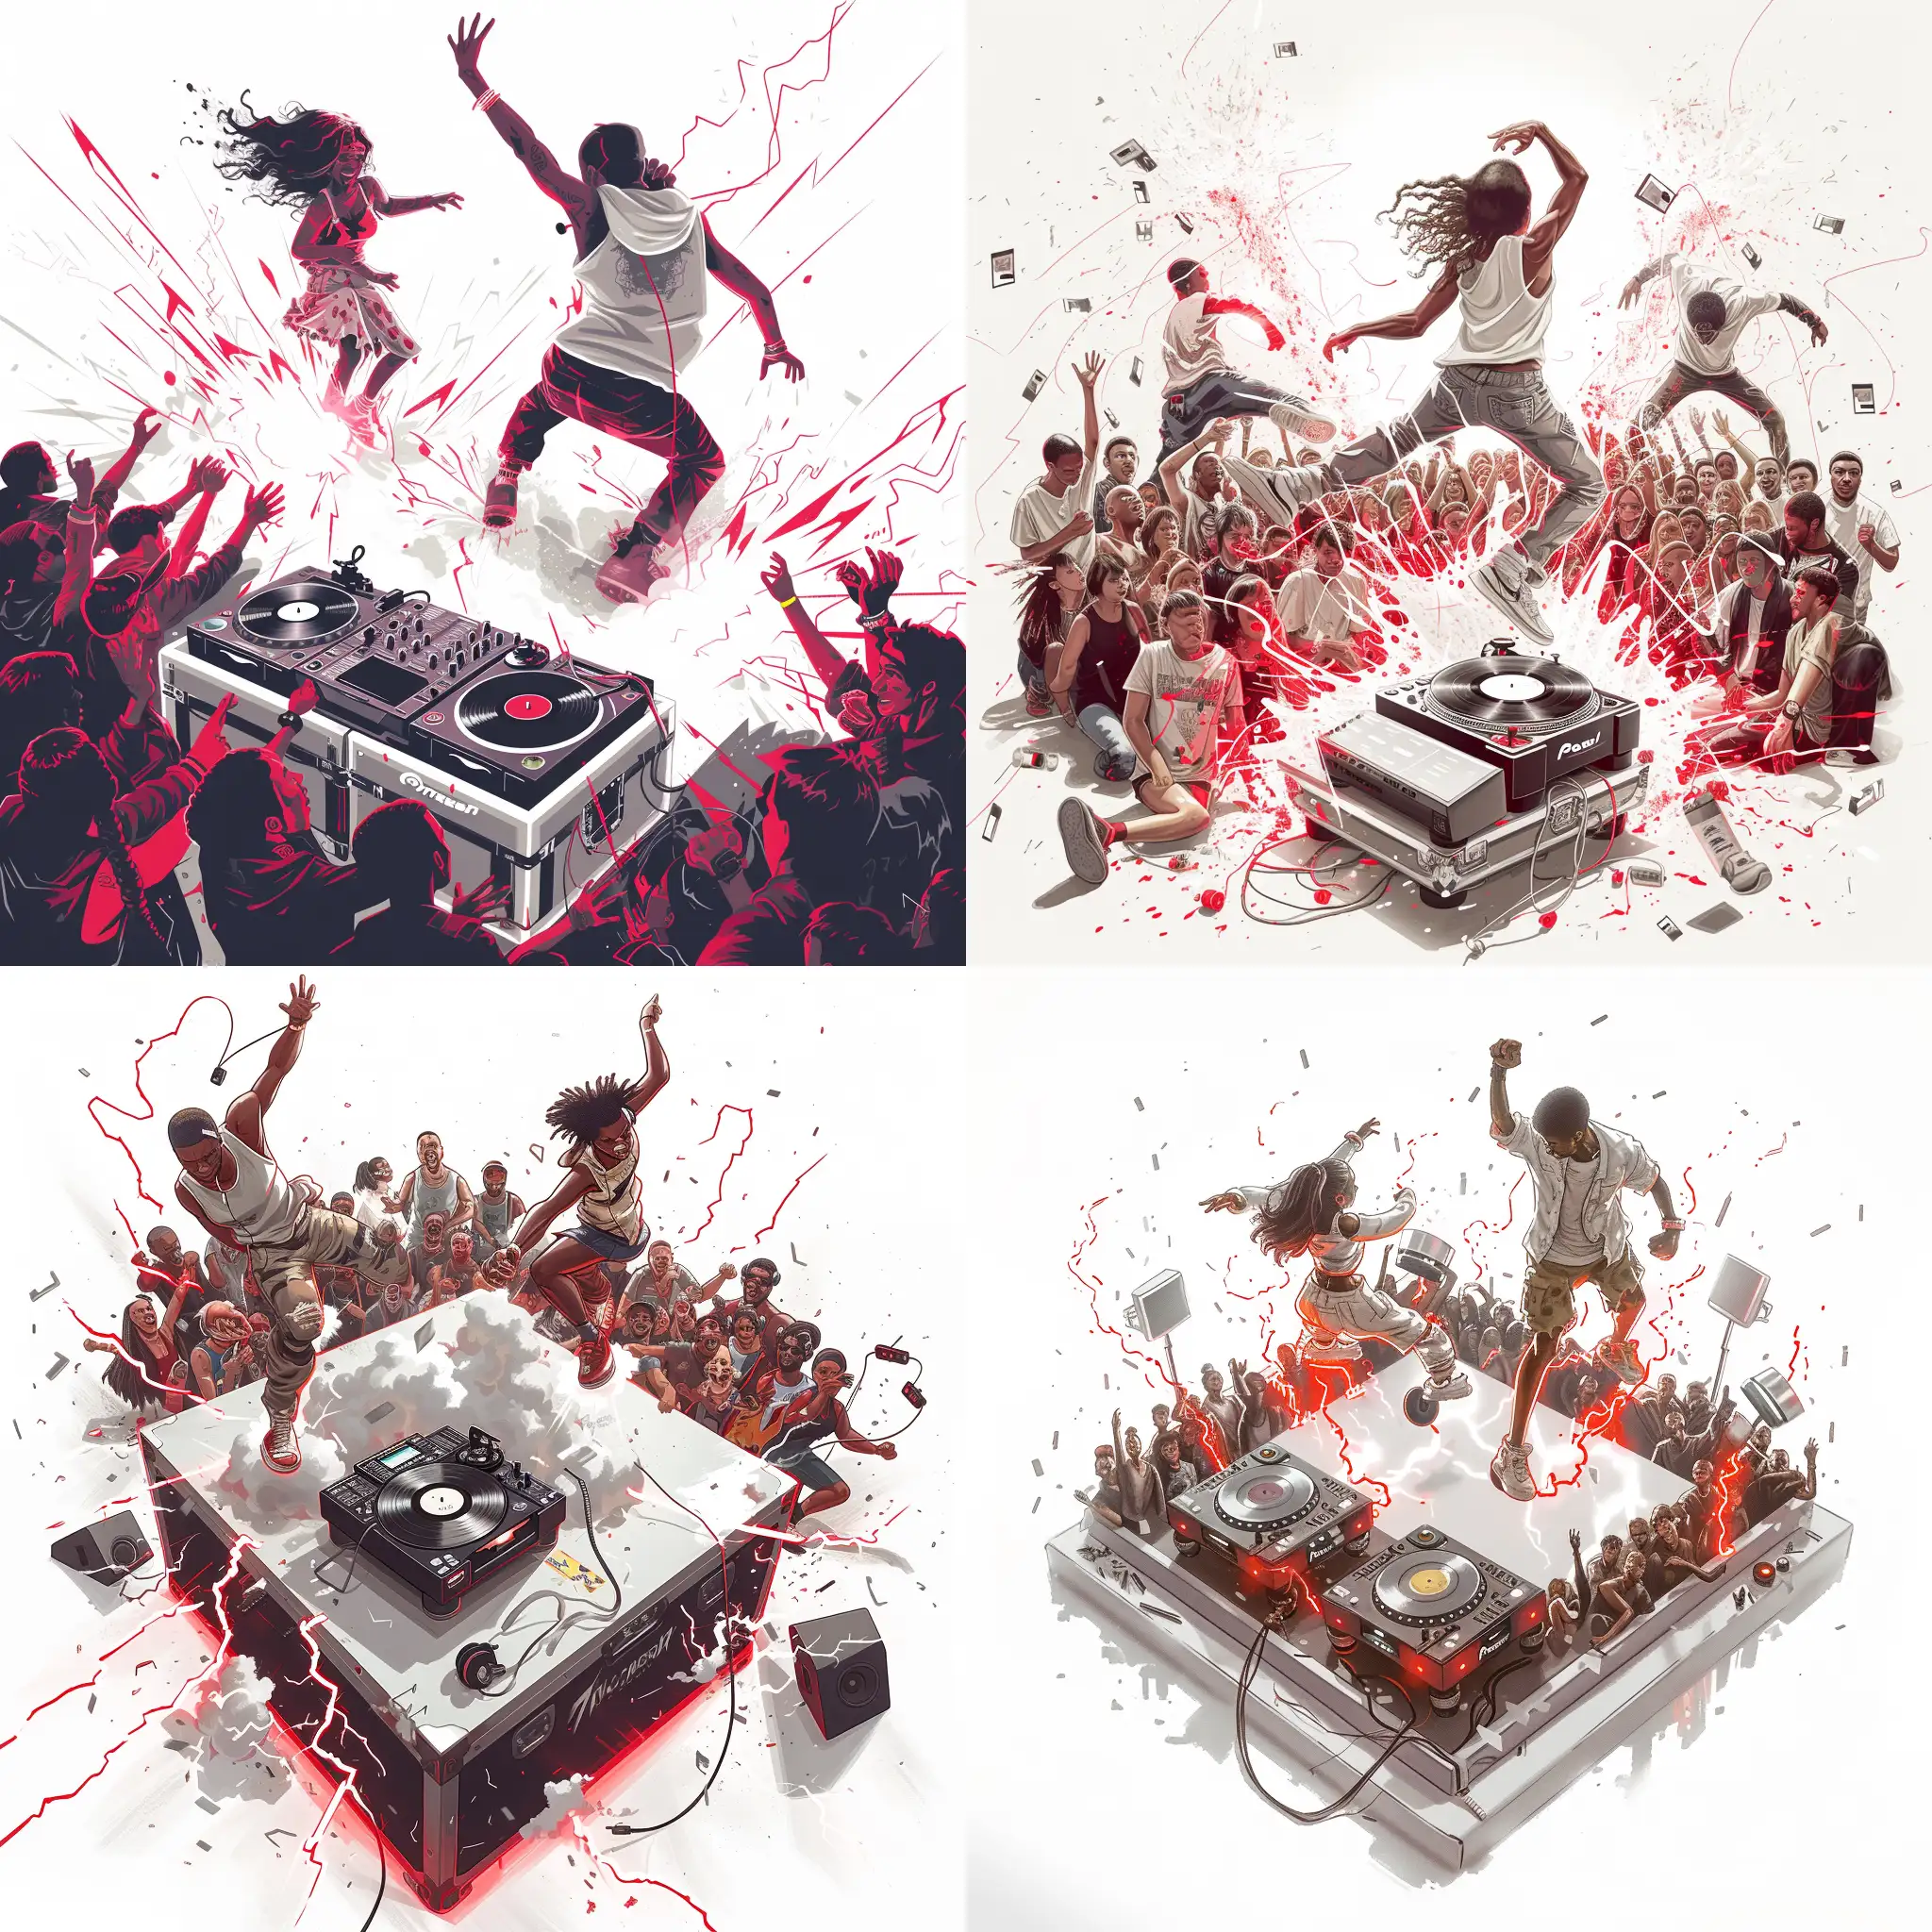 He makes an art based on a breaking dance battle, with a cheering audience, a DJ, and white and red effect lights. with a white background.
At the DJ's base, place a record player, at the breaking battle, place a bgirl doing freezes and a bboy behind, waiting for his turn. include a lighting effect.
Leave just a Bgirl doing a freeze, the crowd around vibrating and the DJ on the pickups.